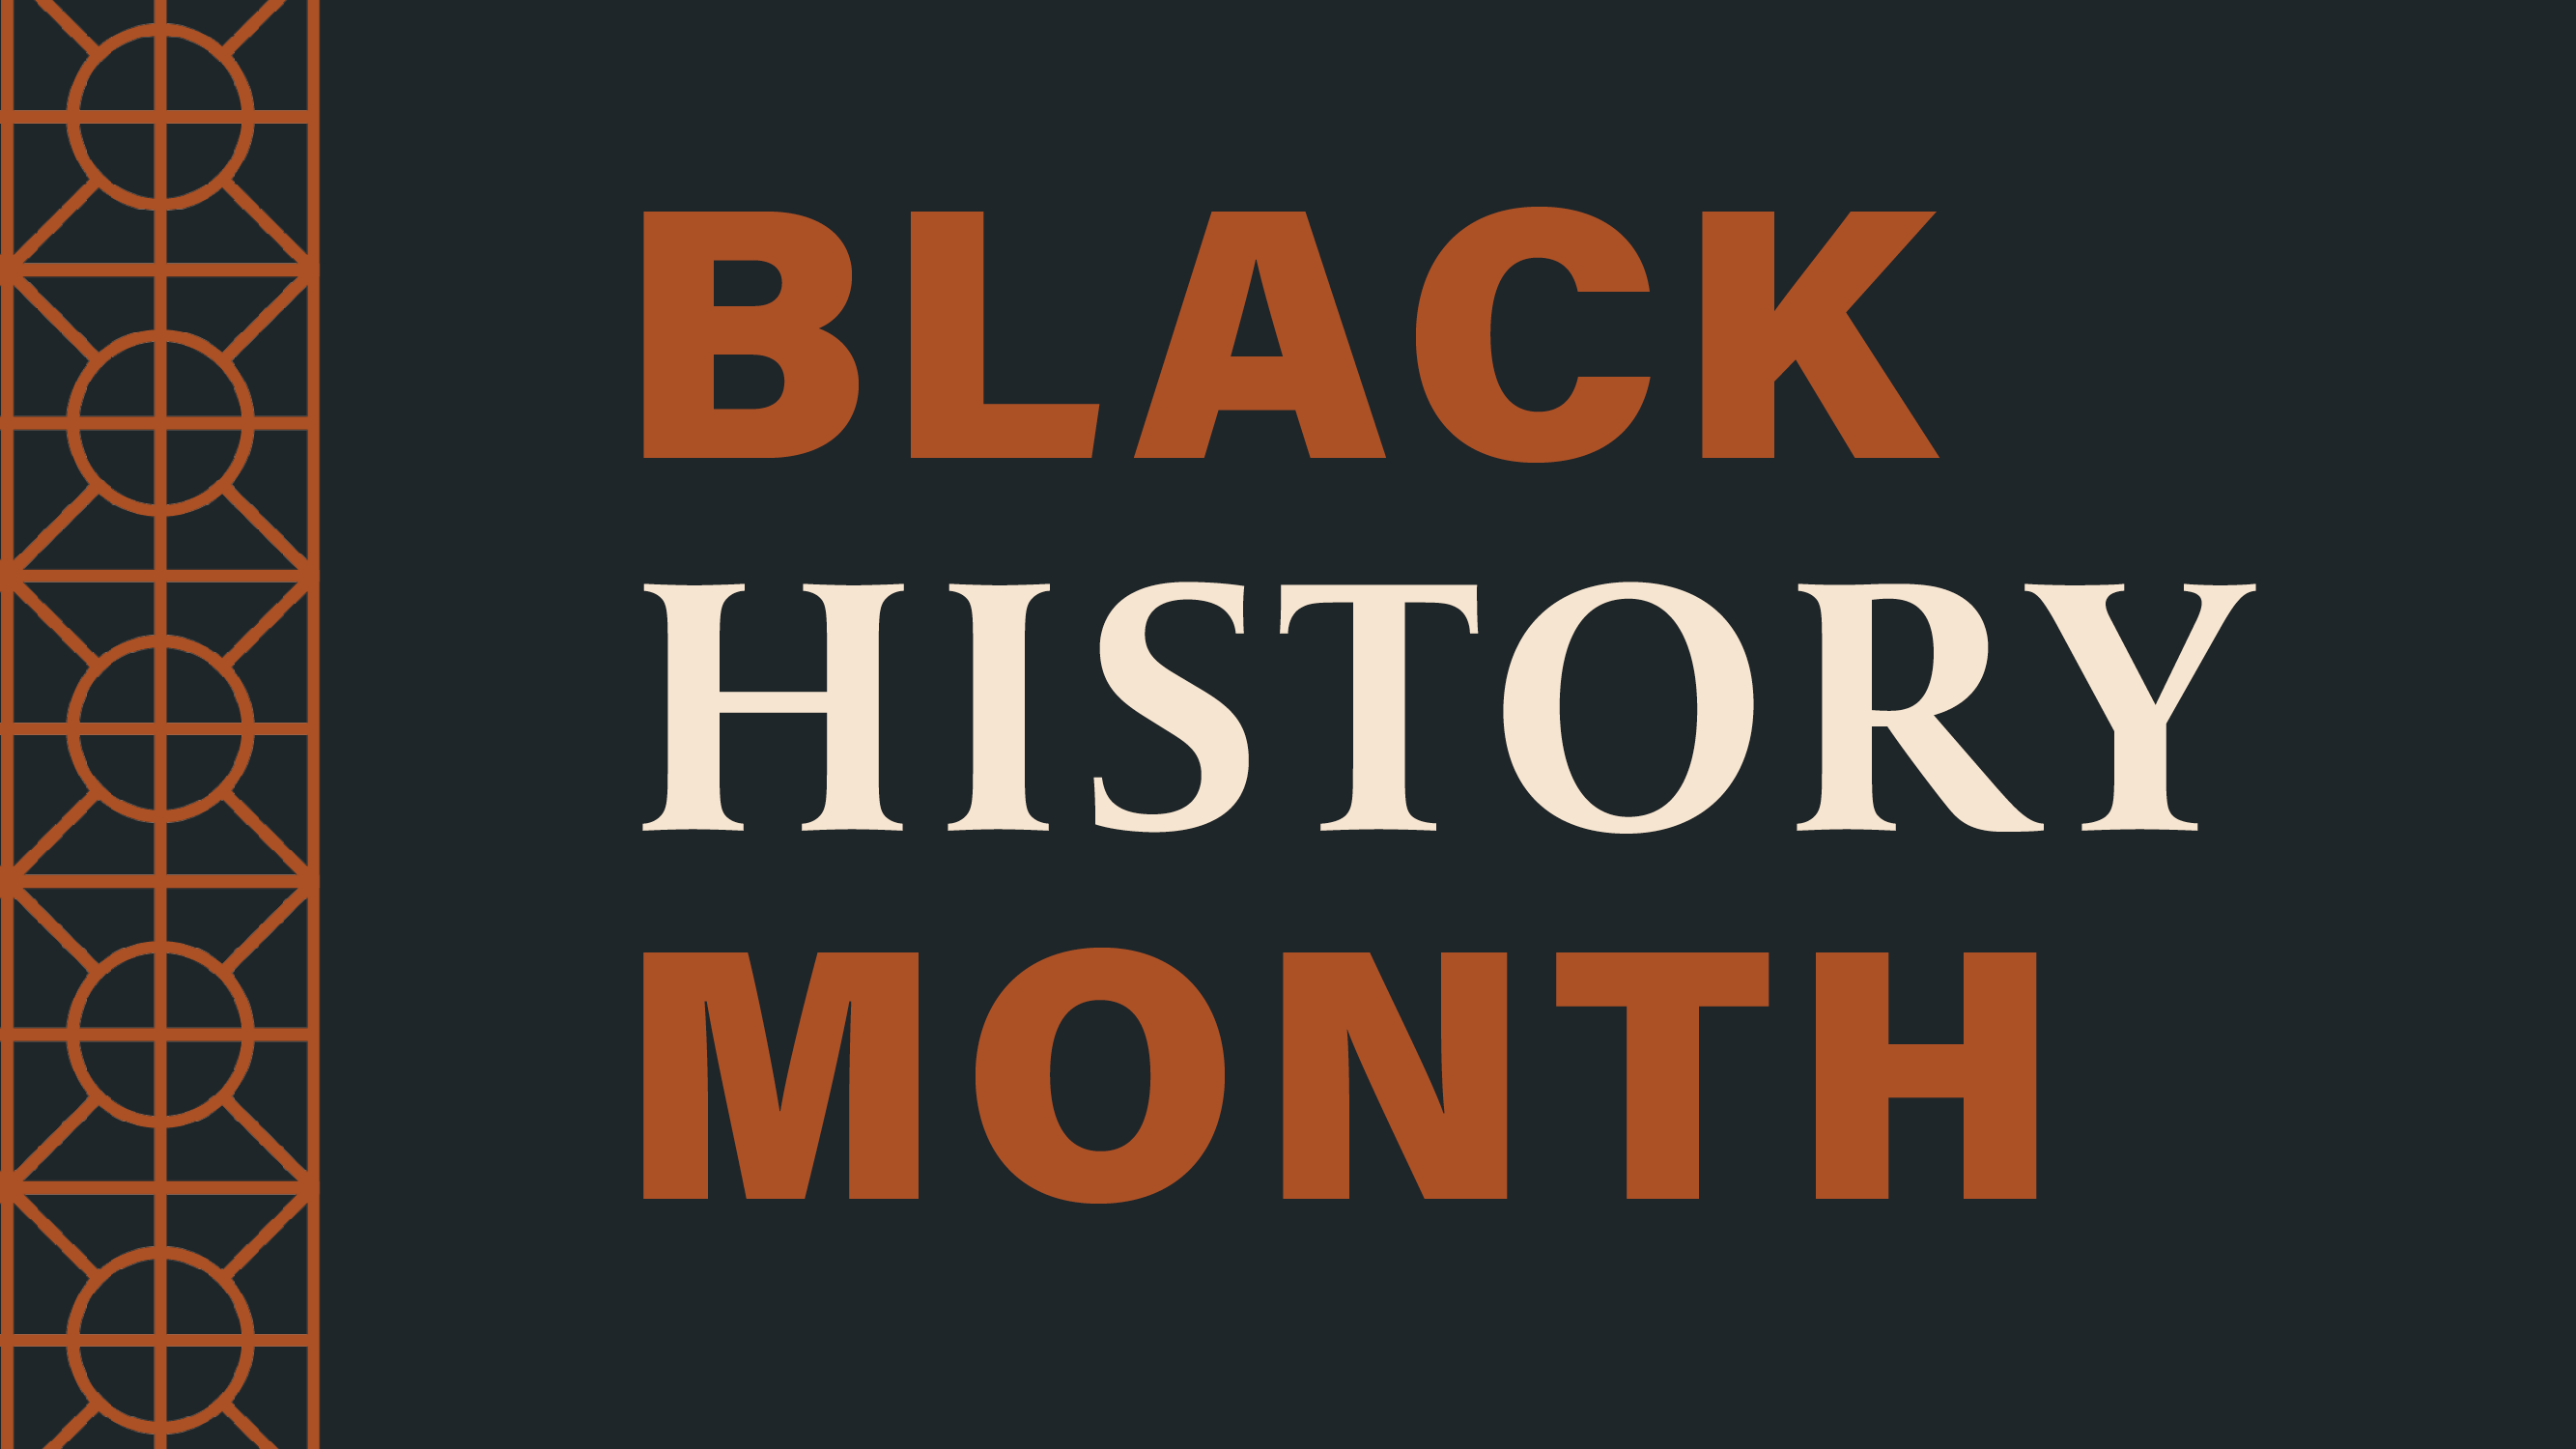 Mark Black History Month with the University Libraries